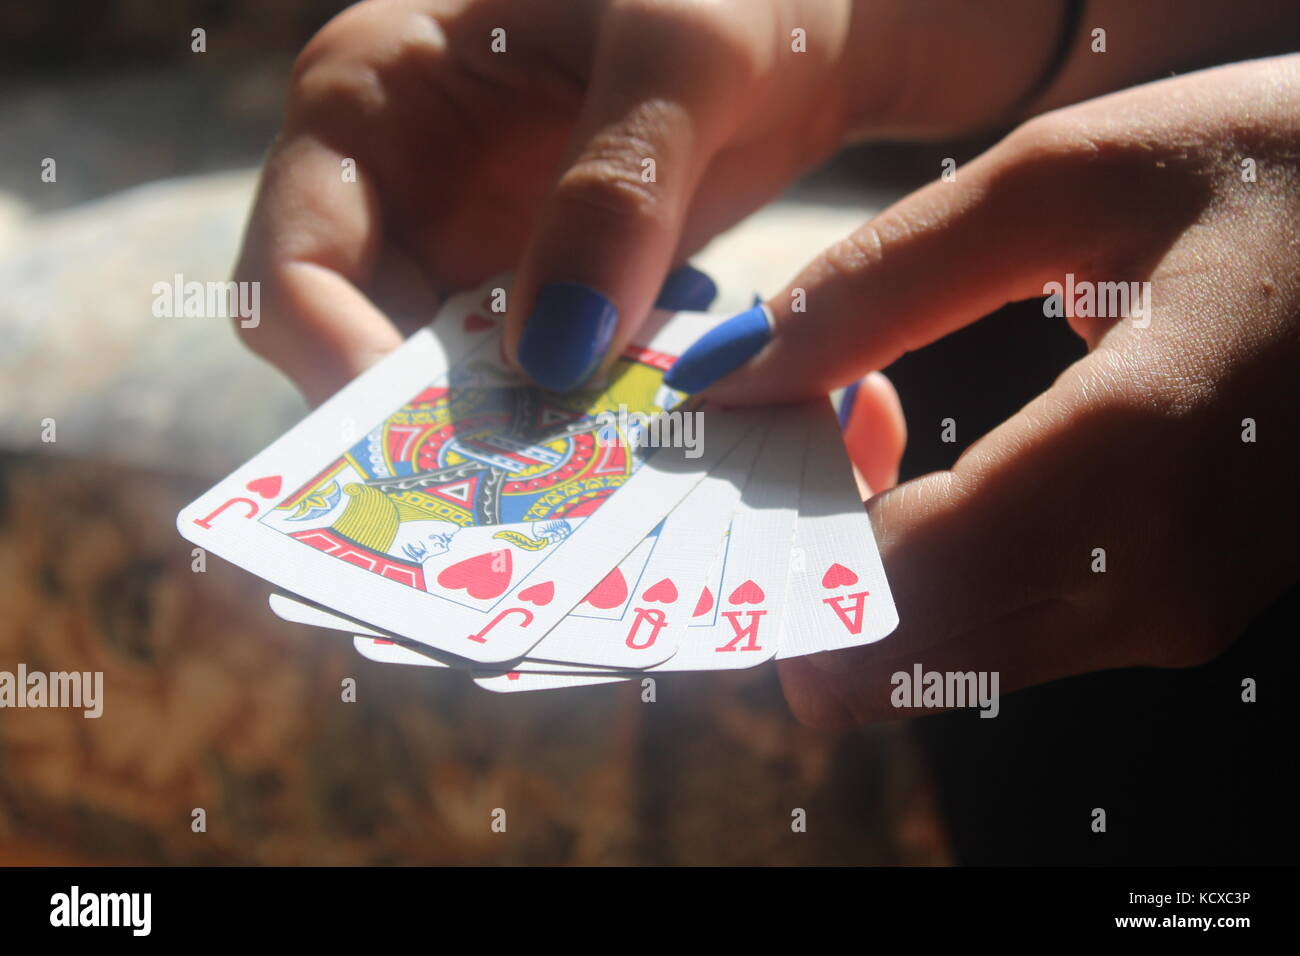 Female hands with blue fingernails spread pack of blue playing cards on wooden table. Stock Photo